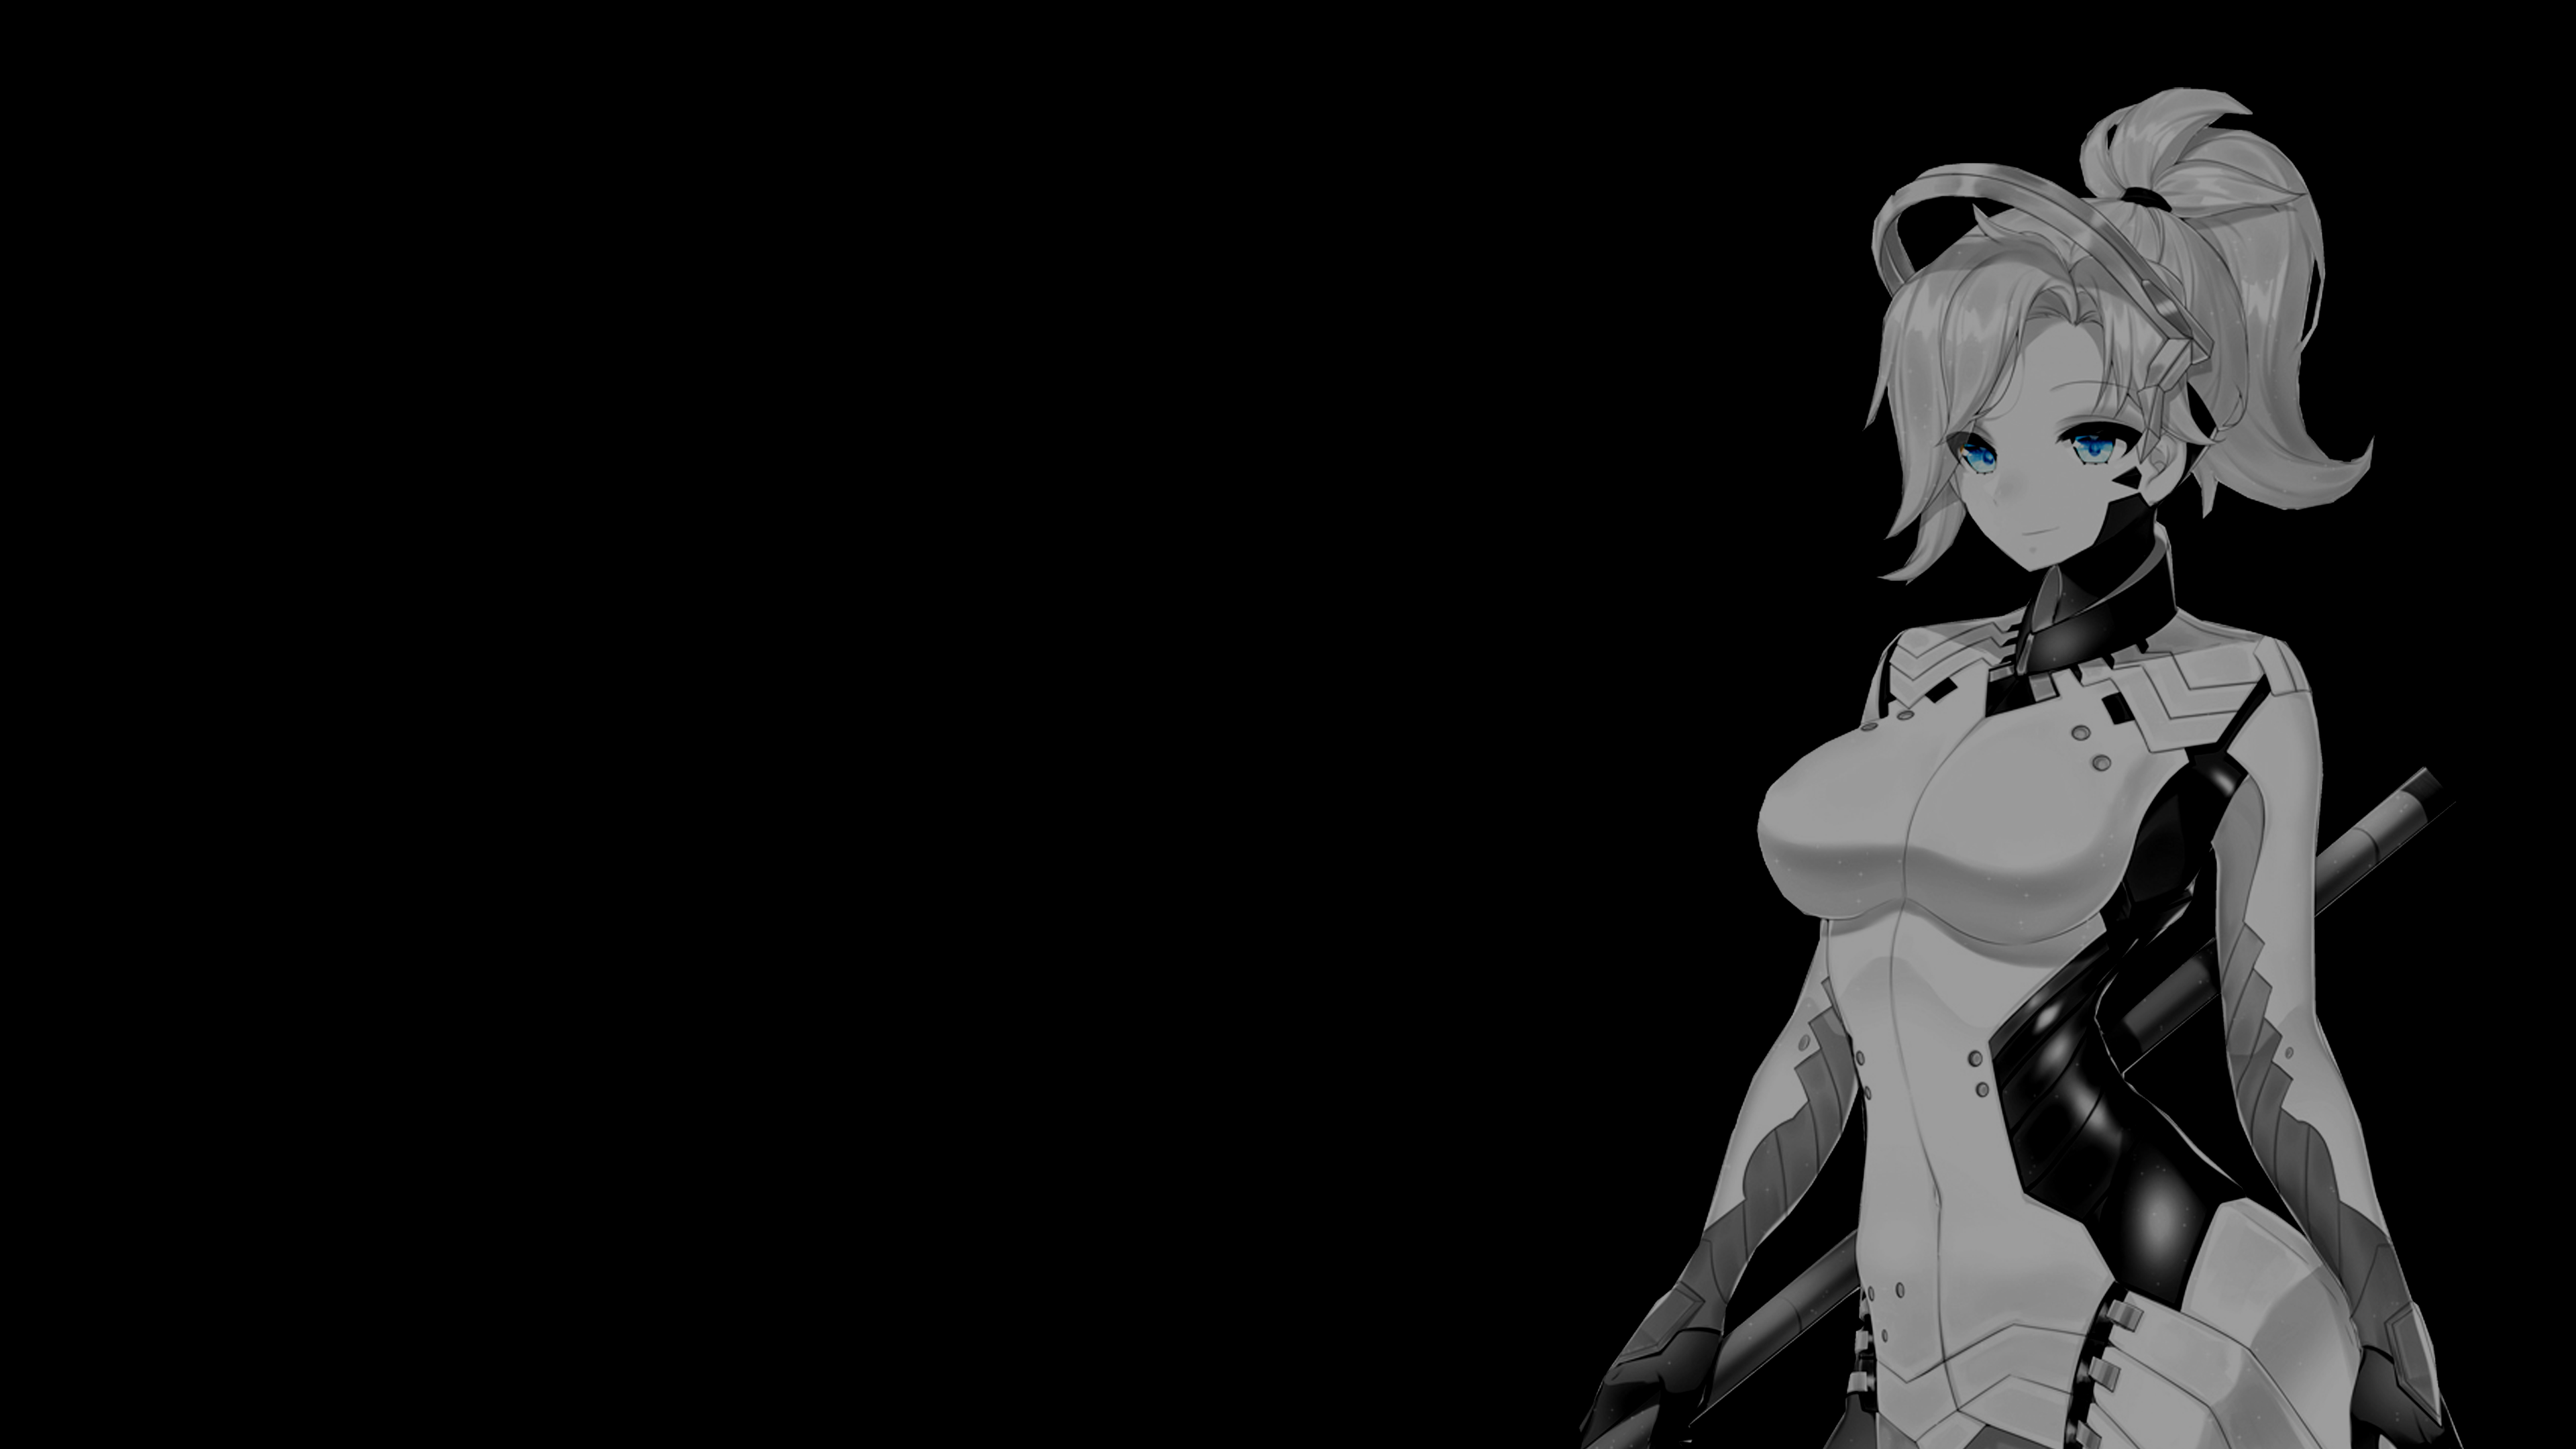 Selective Coloring Black Background Dark Background Simple Background Anime Girls Overwatch Overwatc 3840x2160